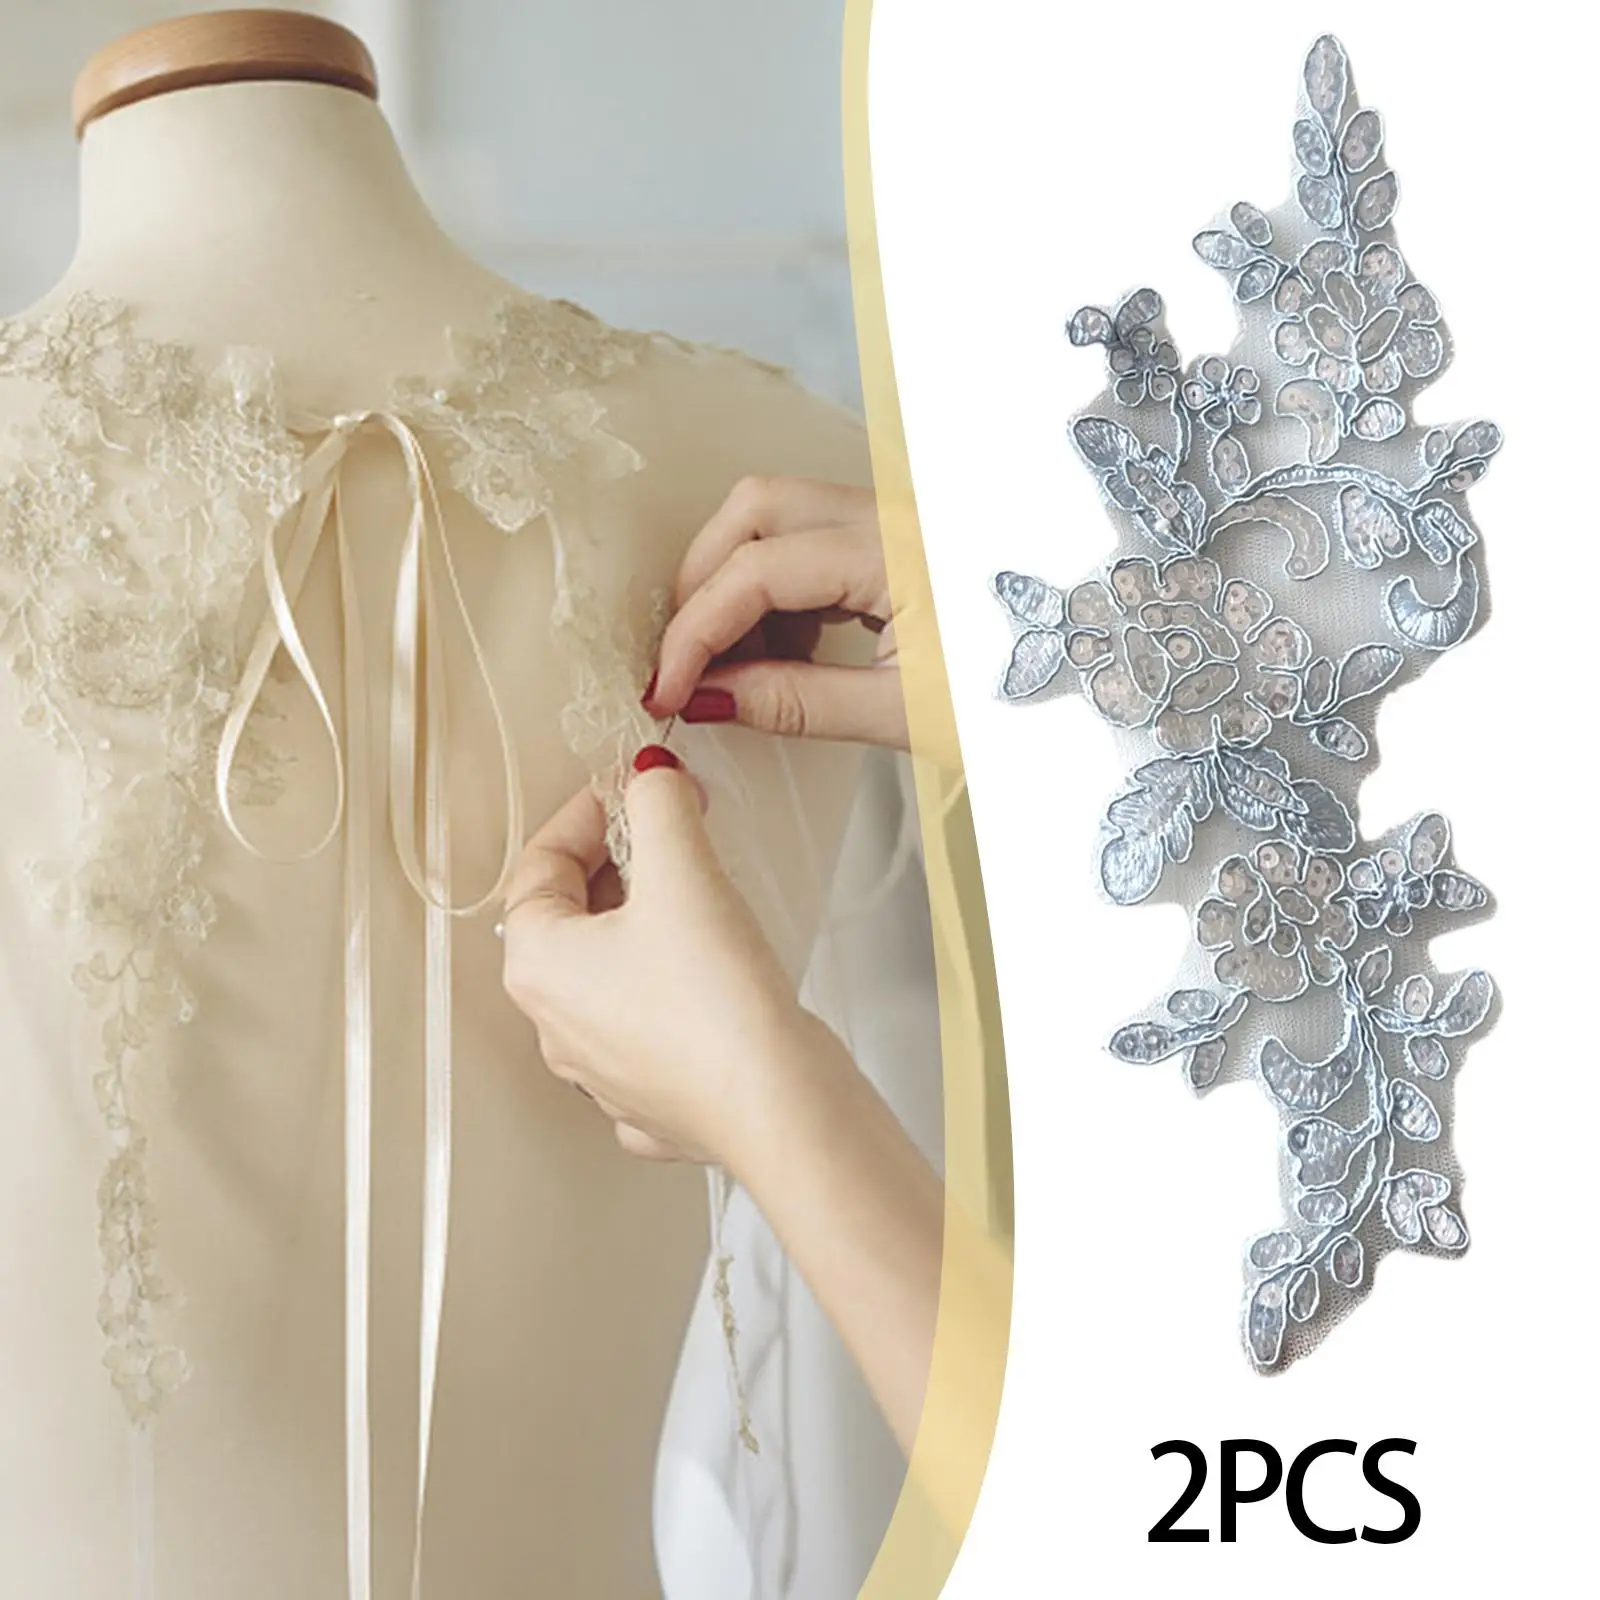 2x Lace Applique Lace Trims Embroidery Appliques Sew on Patches for Repairing Decorating Sewing Crafts Evening Dress Costume